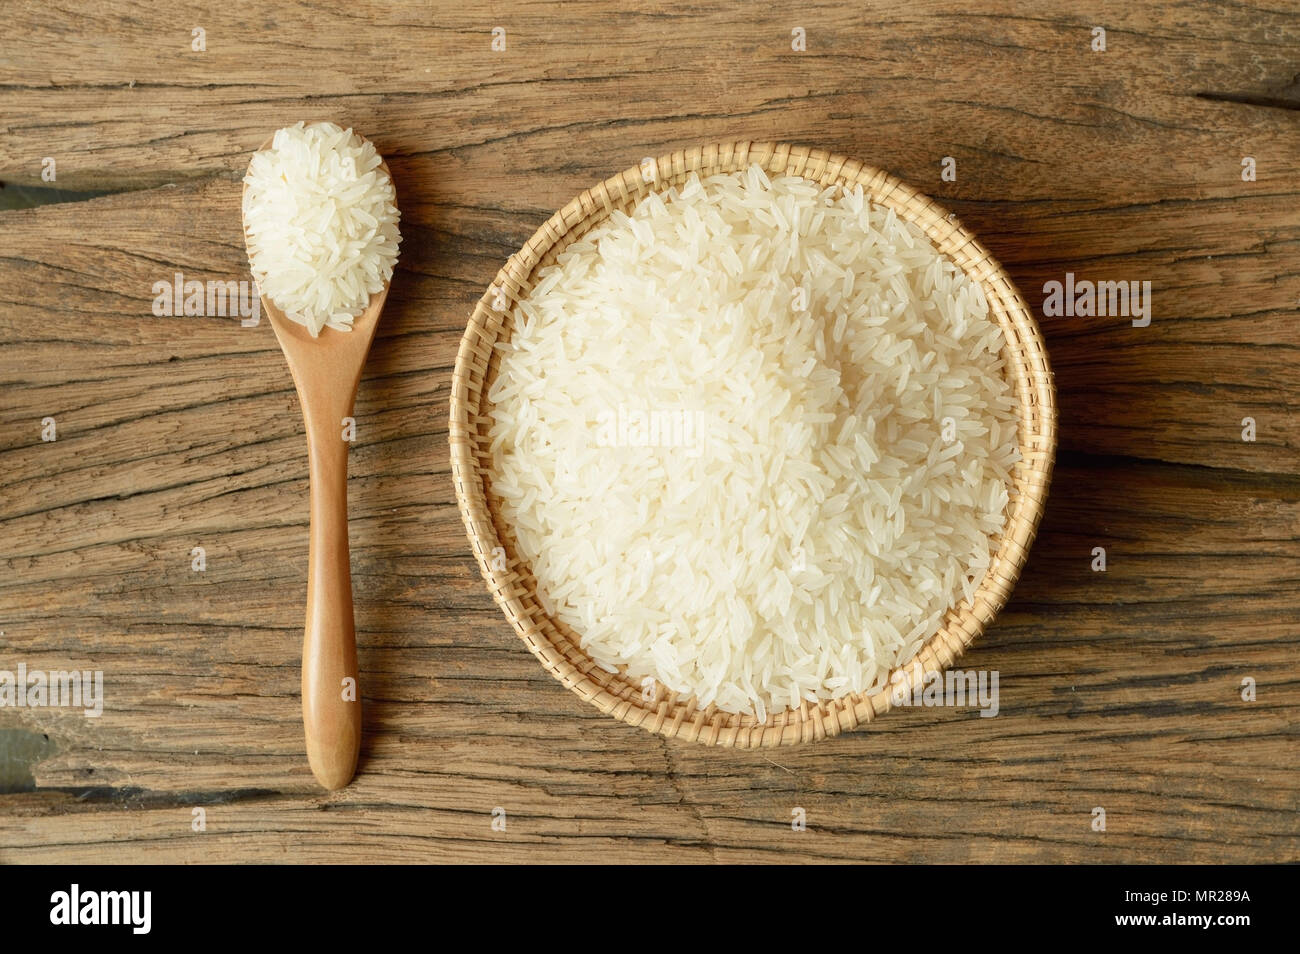 white rice in wicker basket with spoon on wooden background Stock Photo